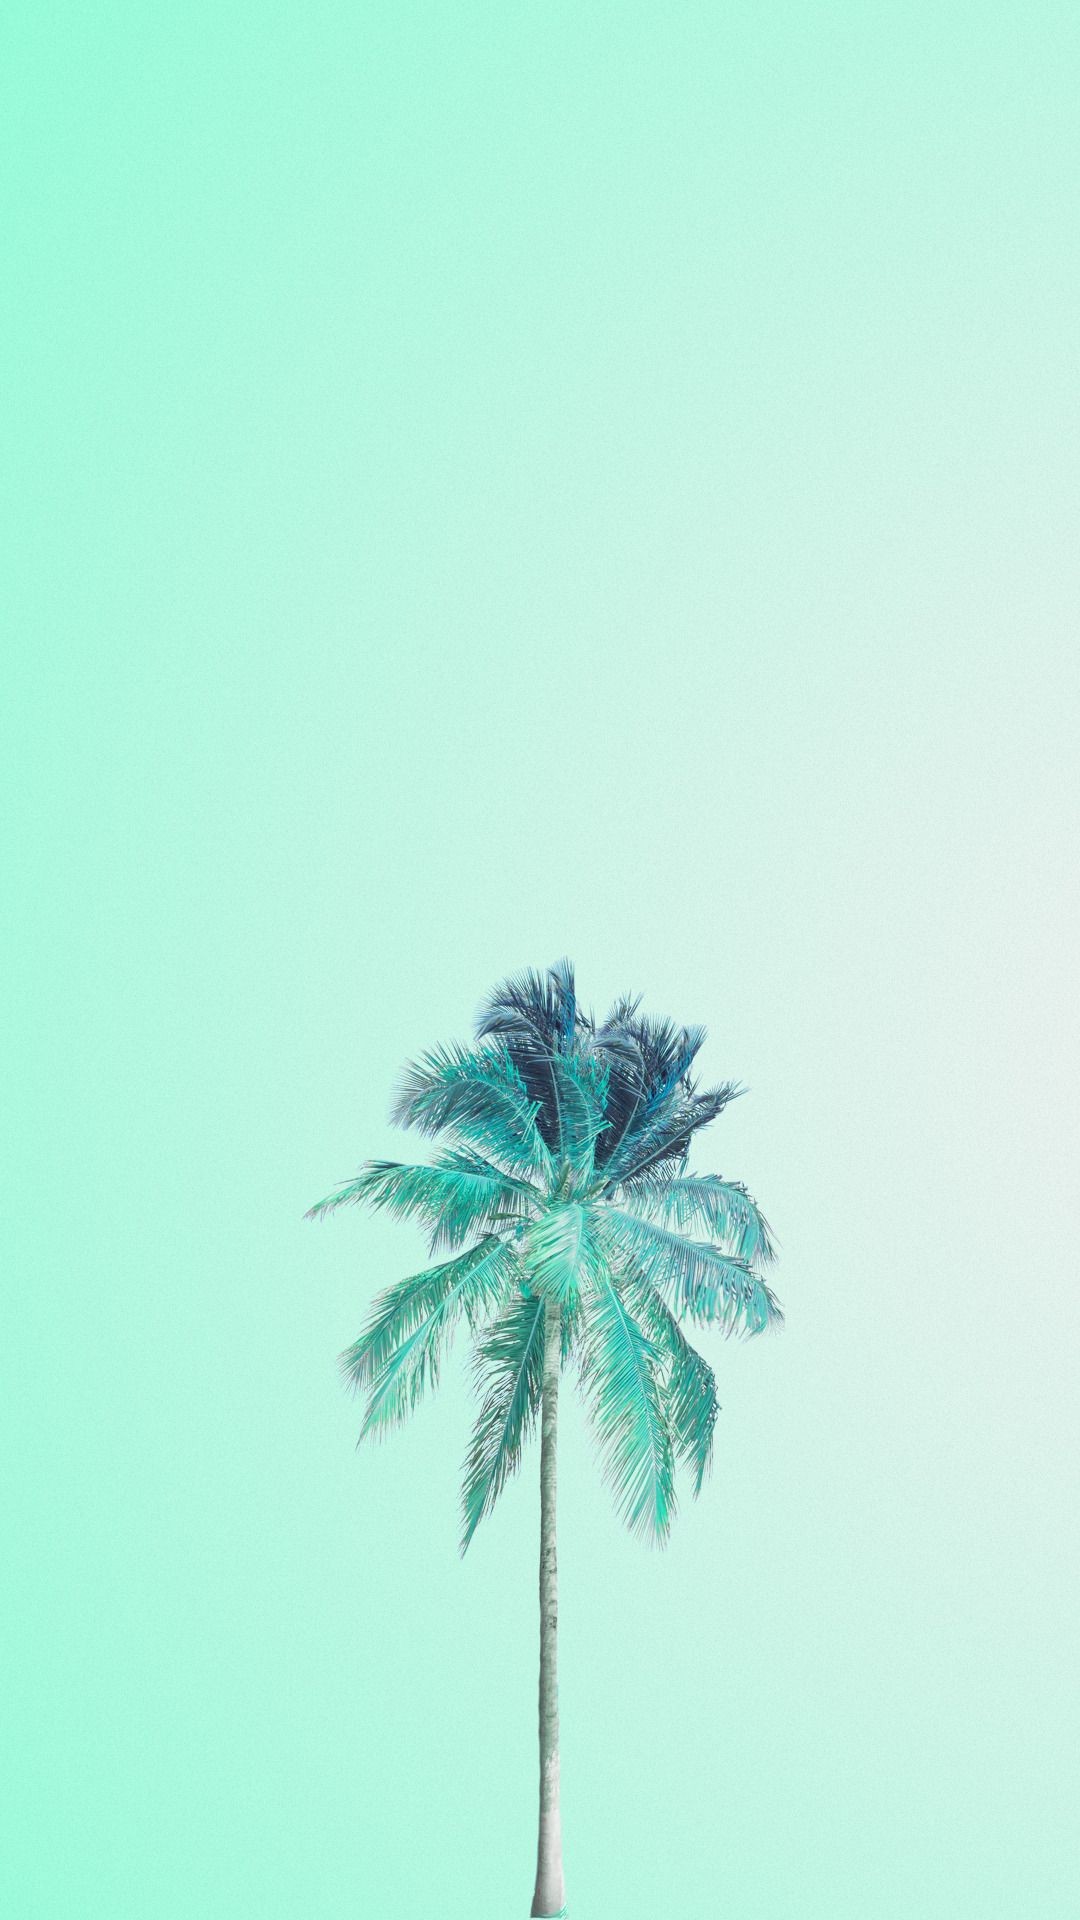 1080x1920 teber@photographer.net Mint Green Wallpaper Iphone, Colorful Wallpaper,  Palm Tree Iphone